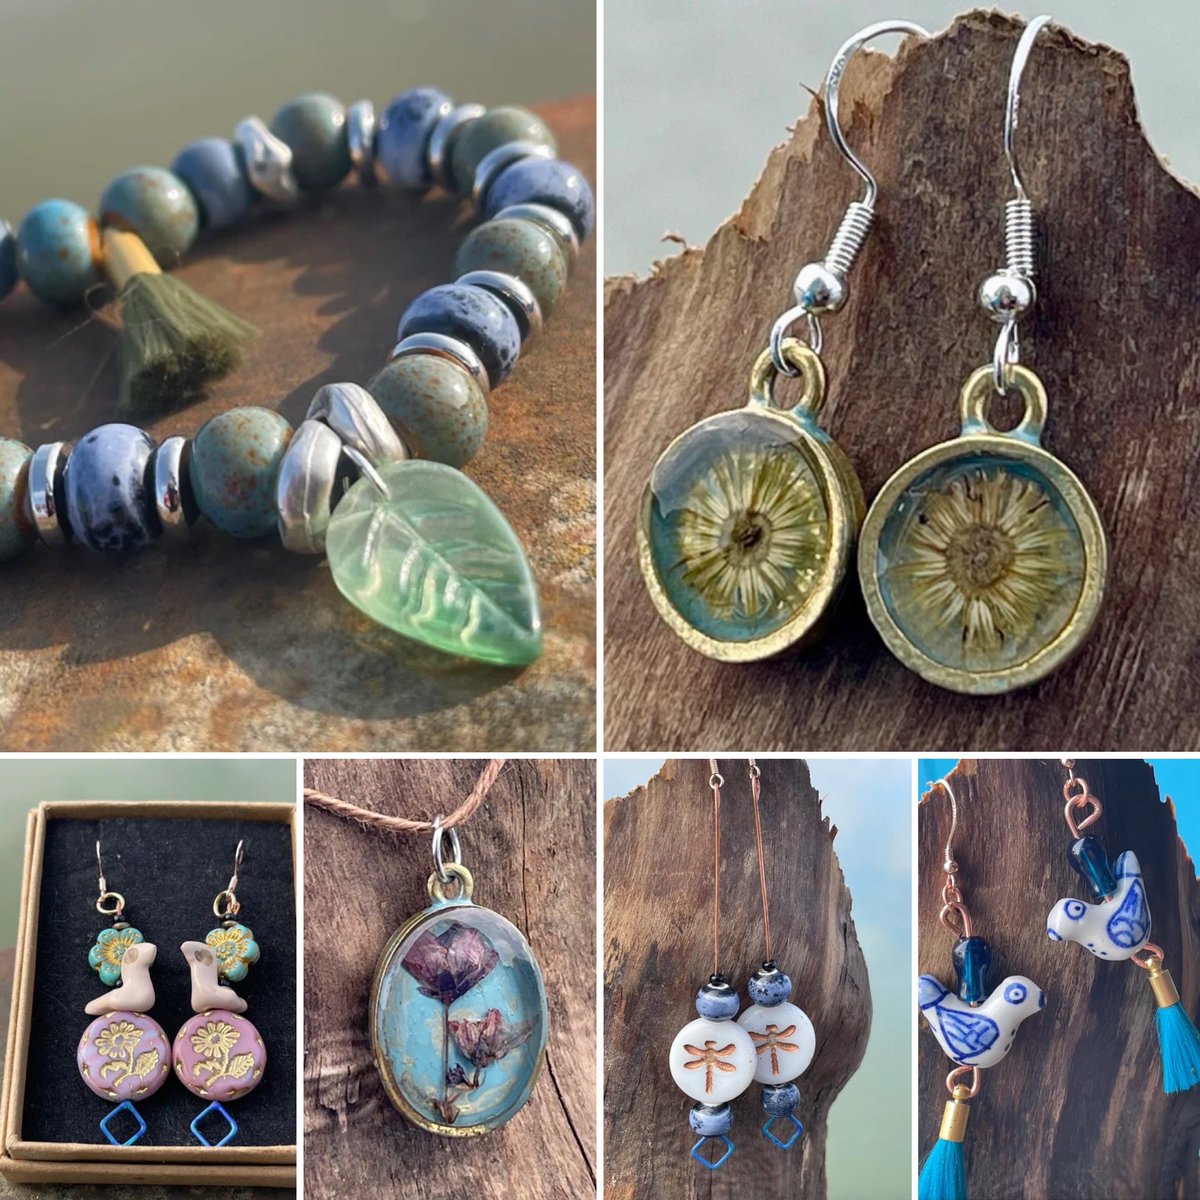 Spring is in the air and in celebration, I have launched a new botanically themed collection of jewellery. To see all and to find out more, please go to ecooctopus.etsy.com 🌱 #MHHSBD #earlybiz #shopindie #elevenseshour